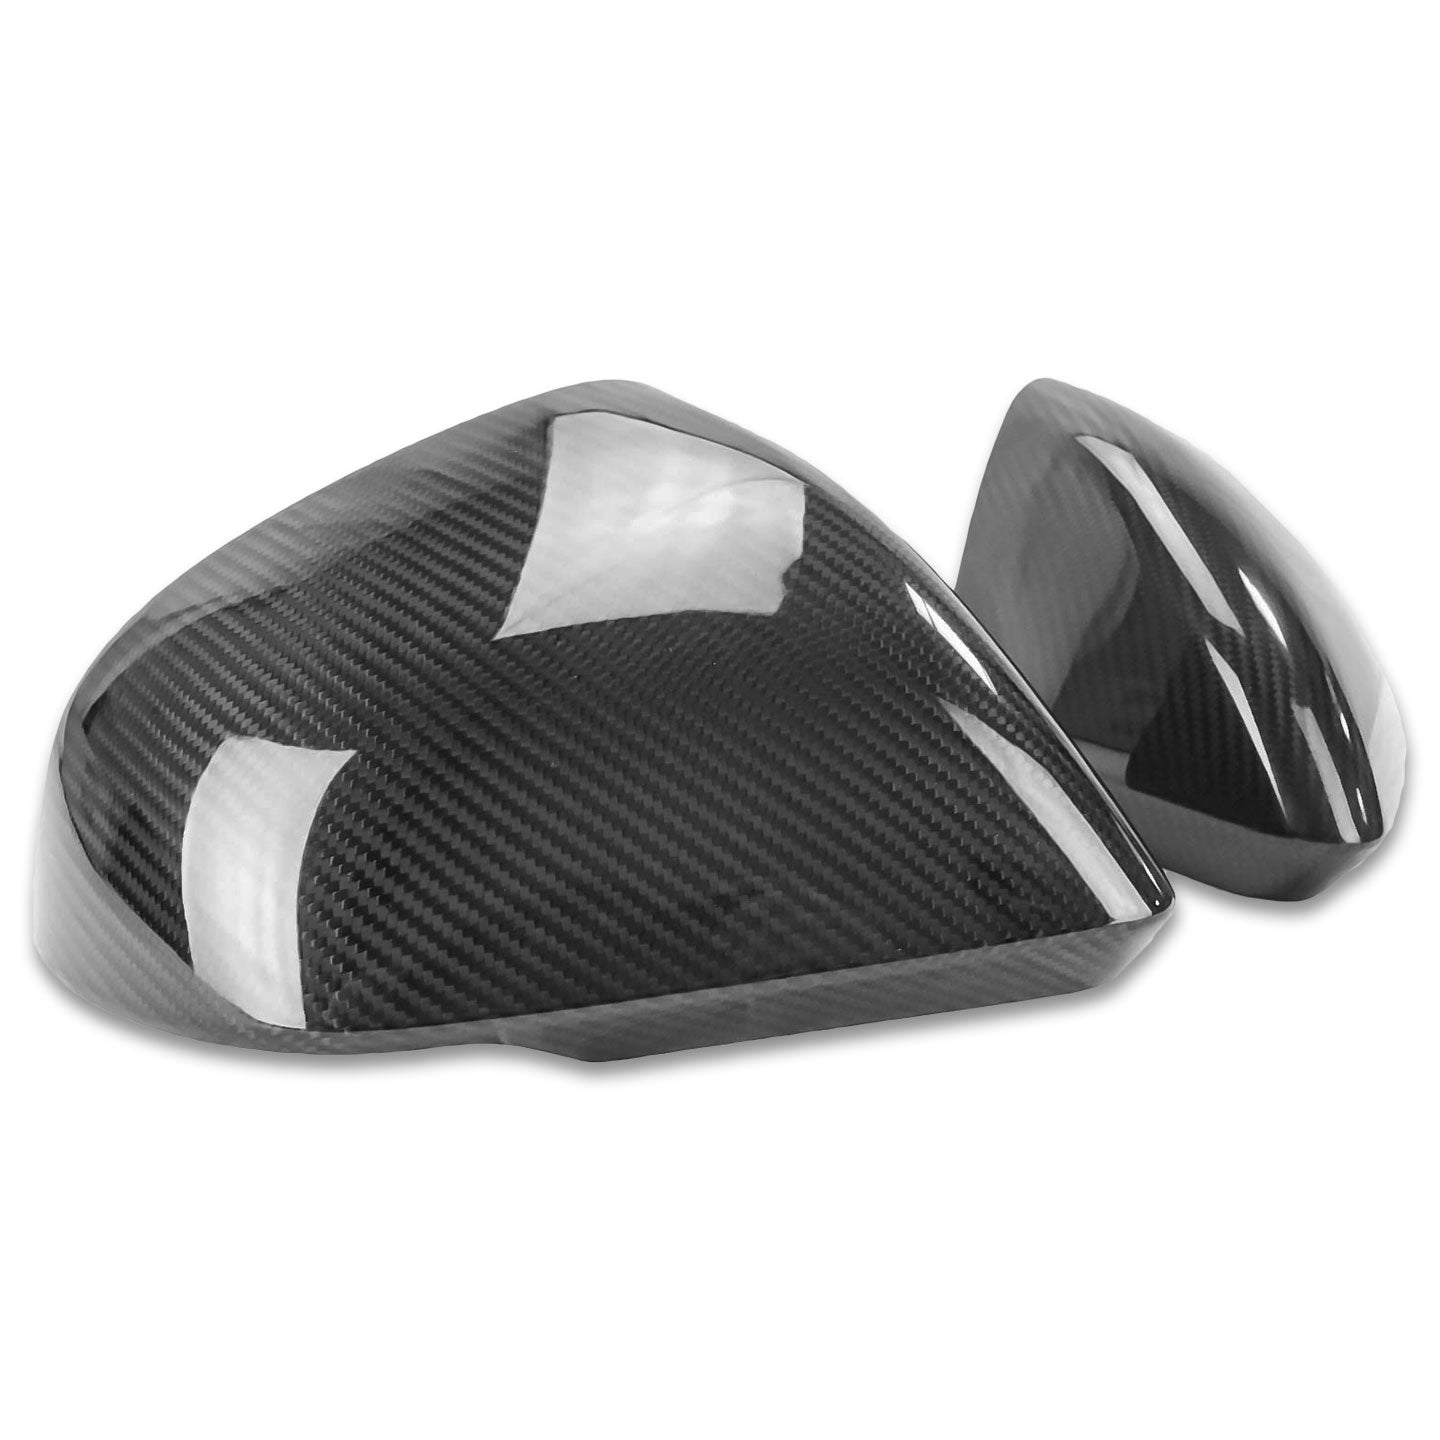 2015-2020 Ford Mustang - Real Carbon Fiber Side View Mirror Cover (W/ Turn Signals)